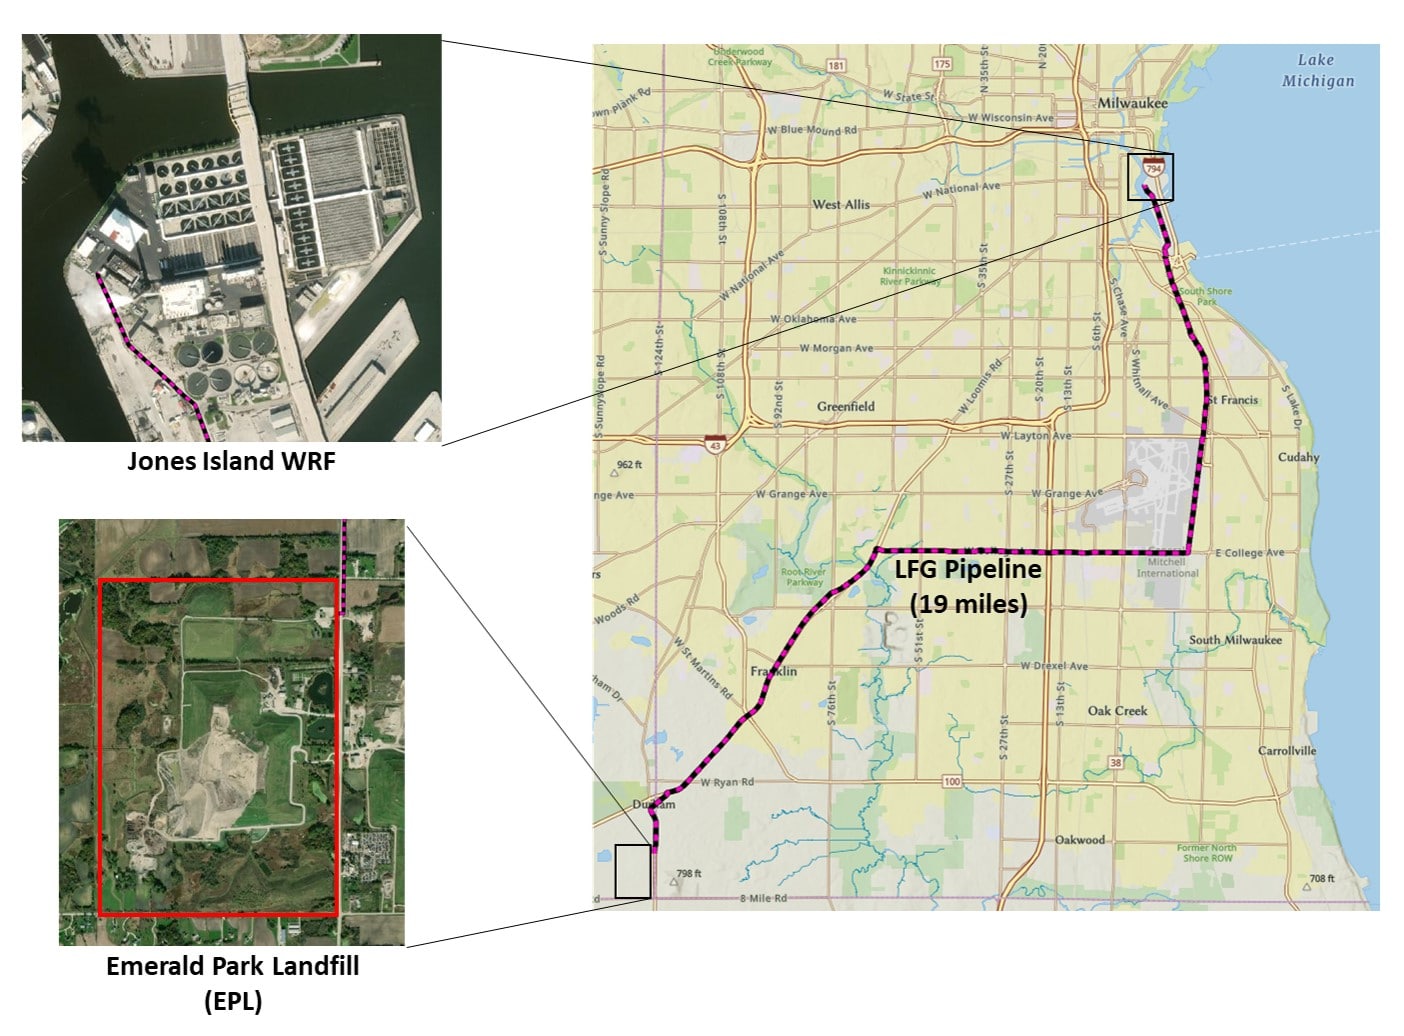 A map showing MMSD's landfill gas pipeline route